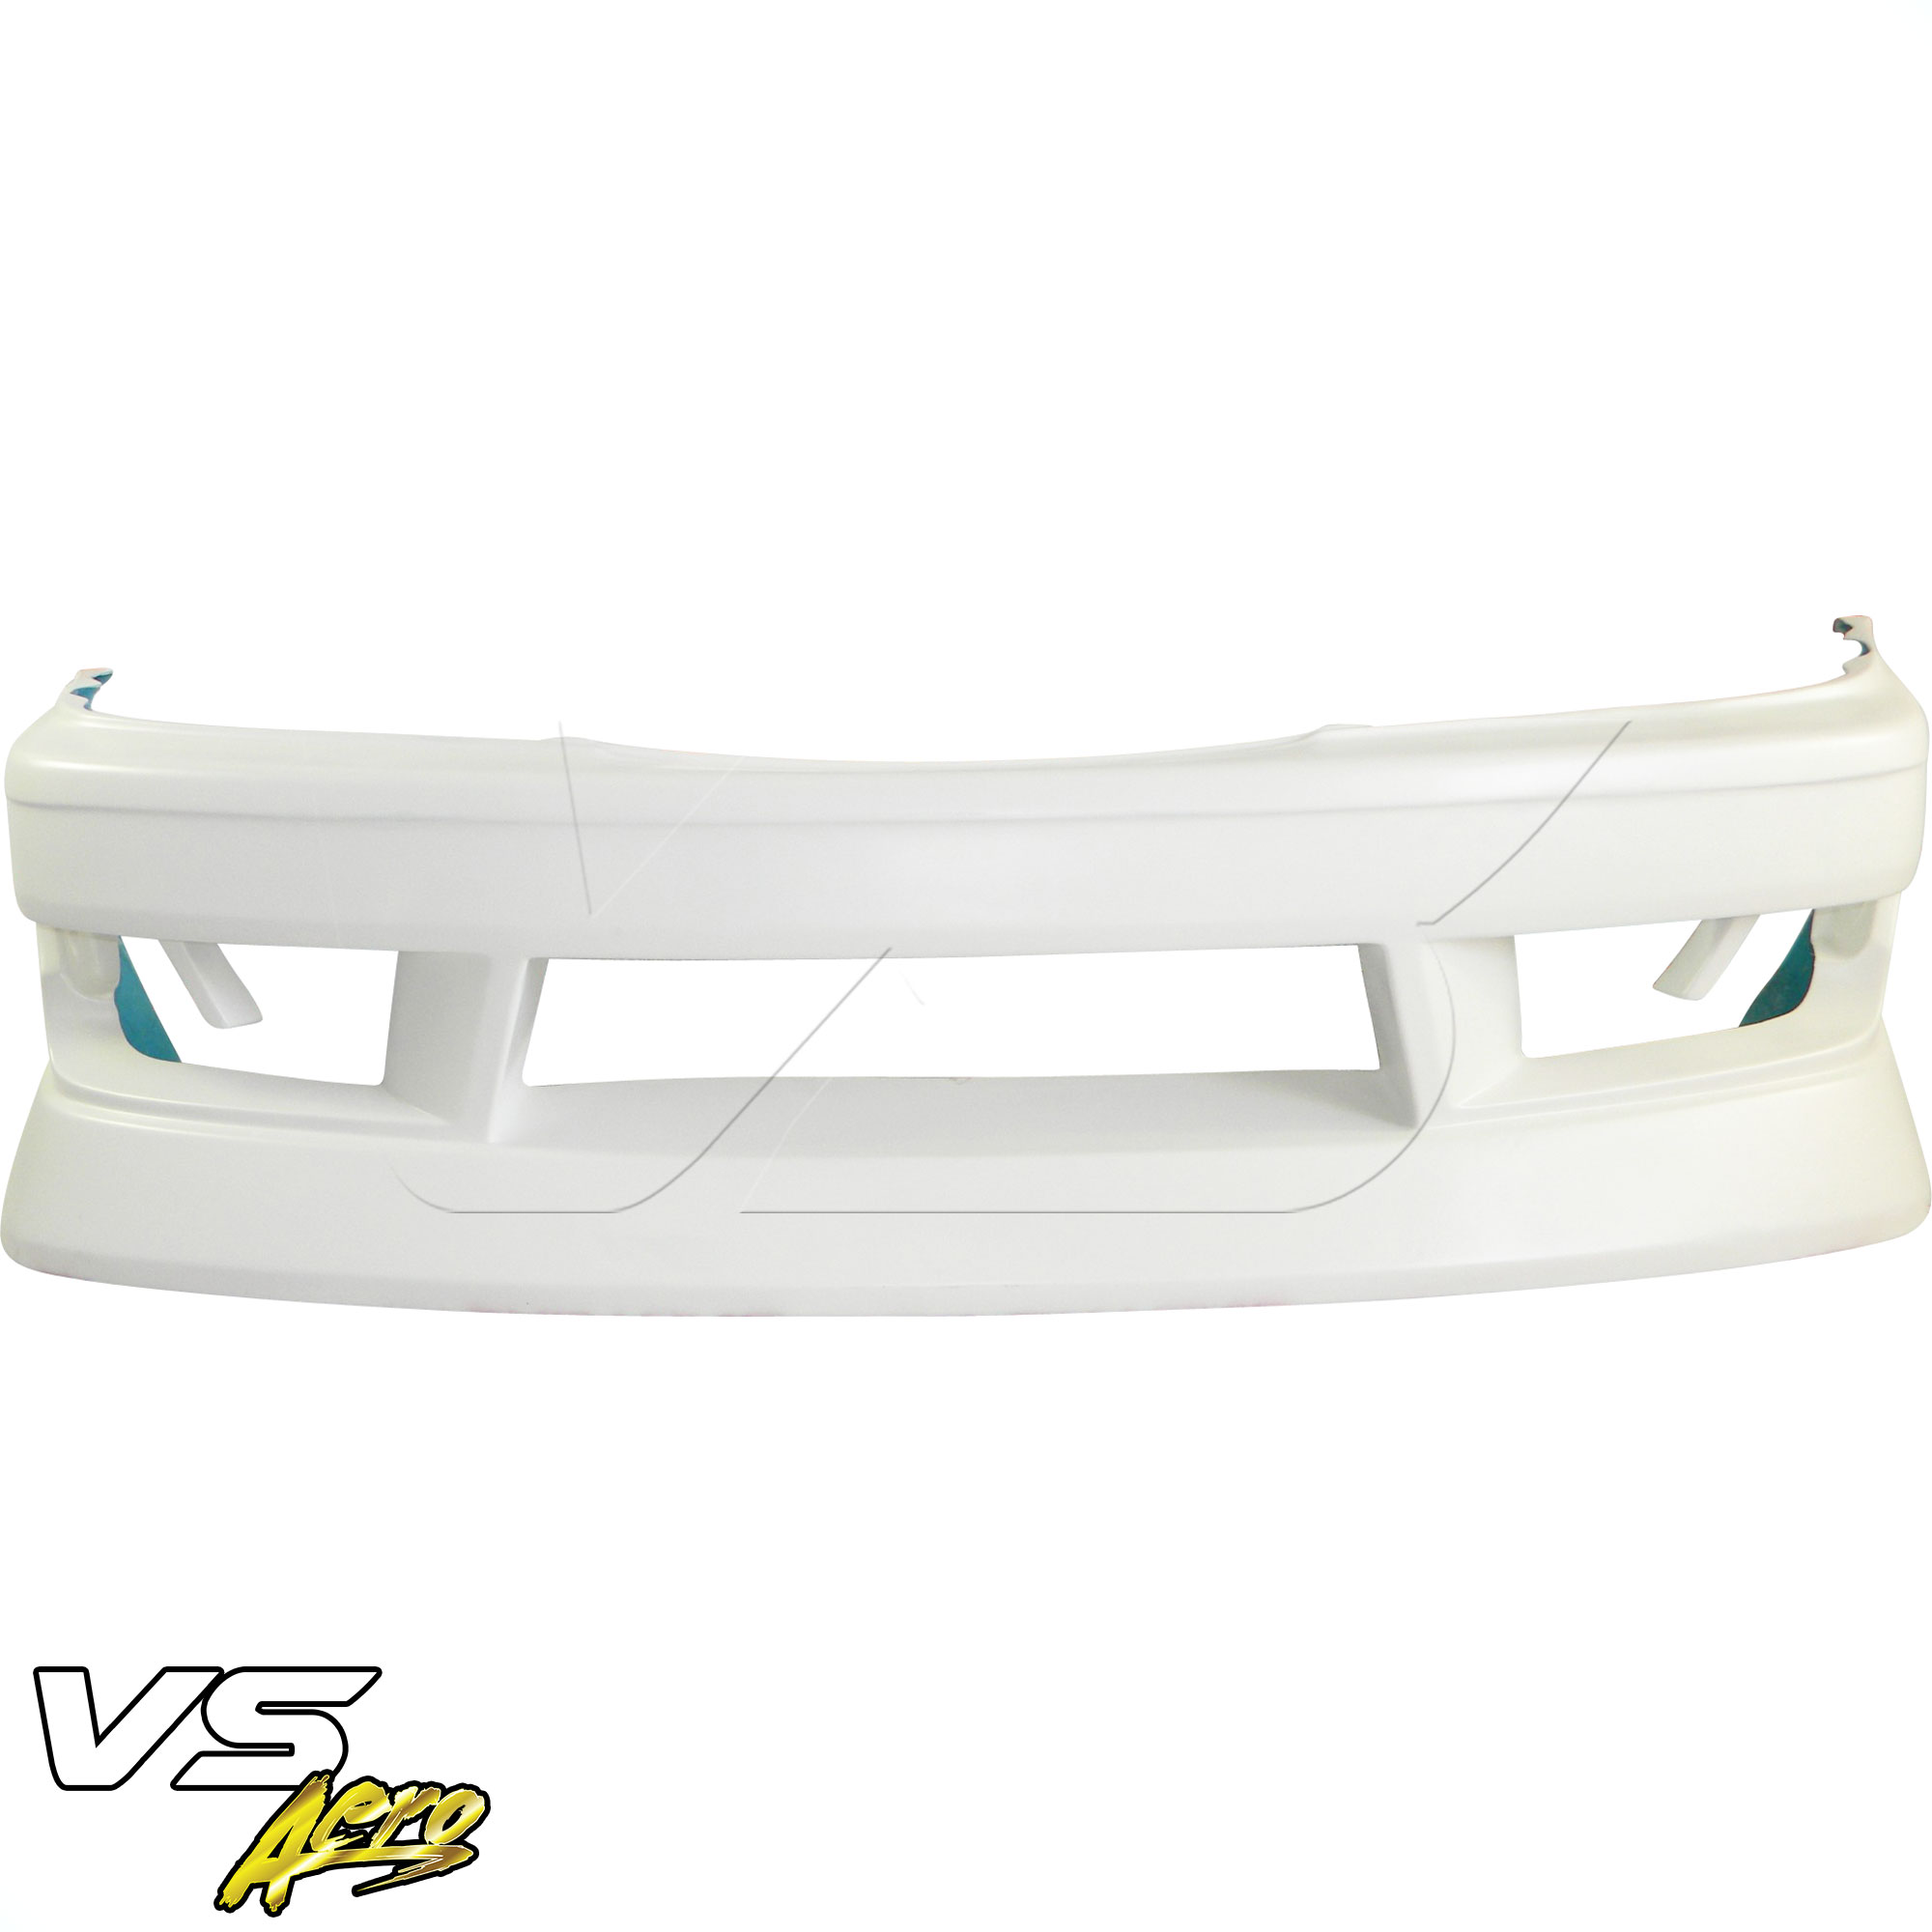 VSaero FRP BSPO Front Bumper > Toyota Chaser JZX100 1996-2000 - Image 13